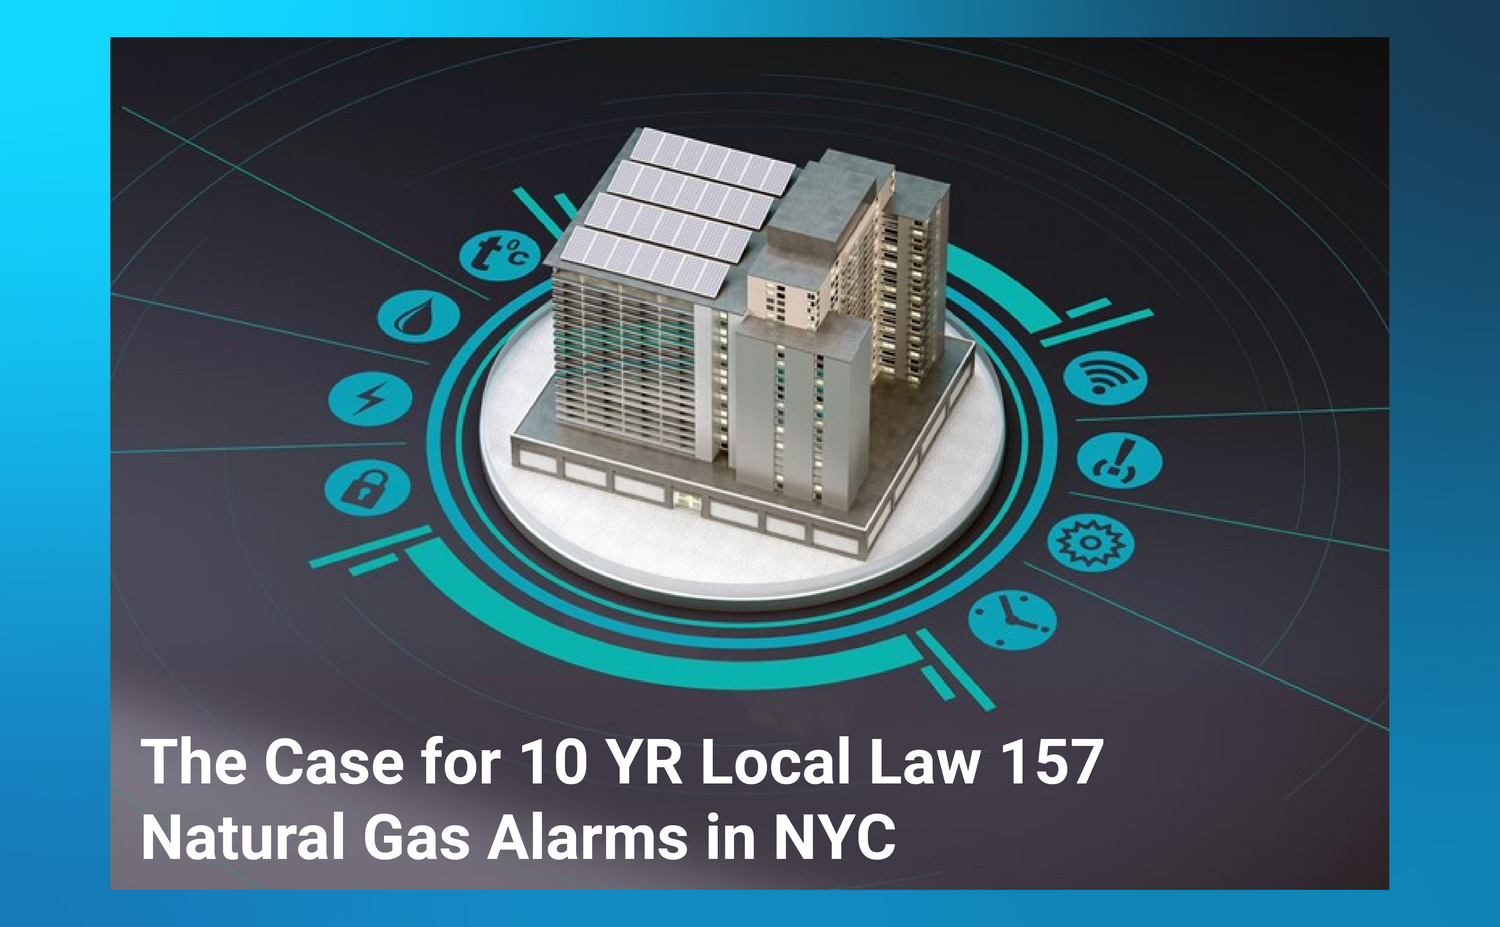 The Case for 10 YR Local Law 157 Natural Gas Alarms in NYC